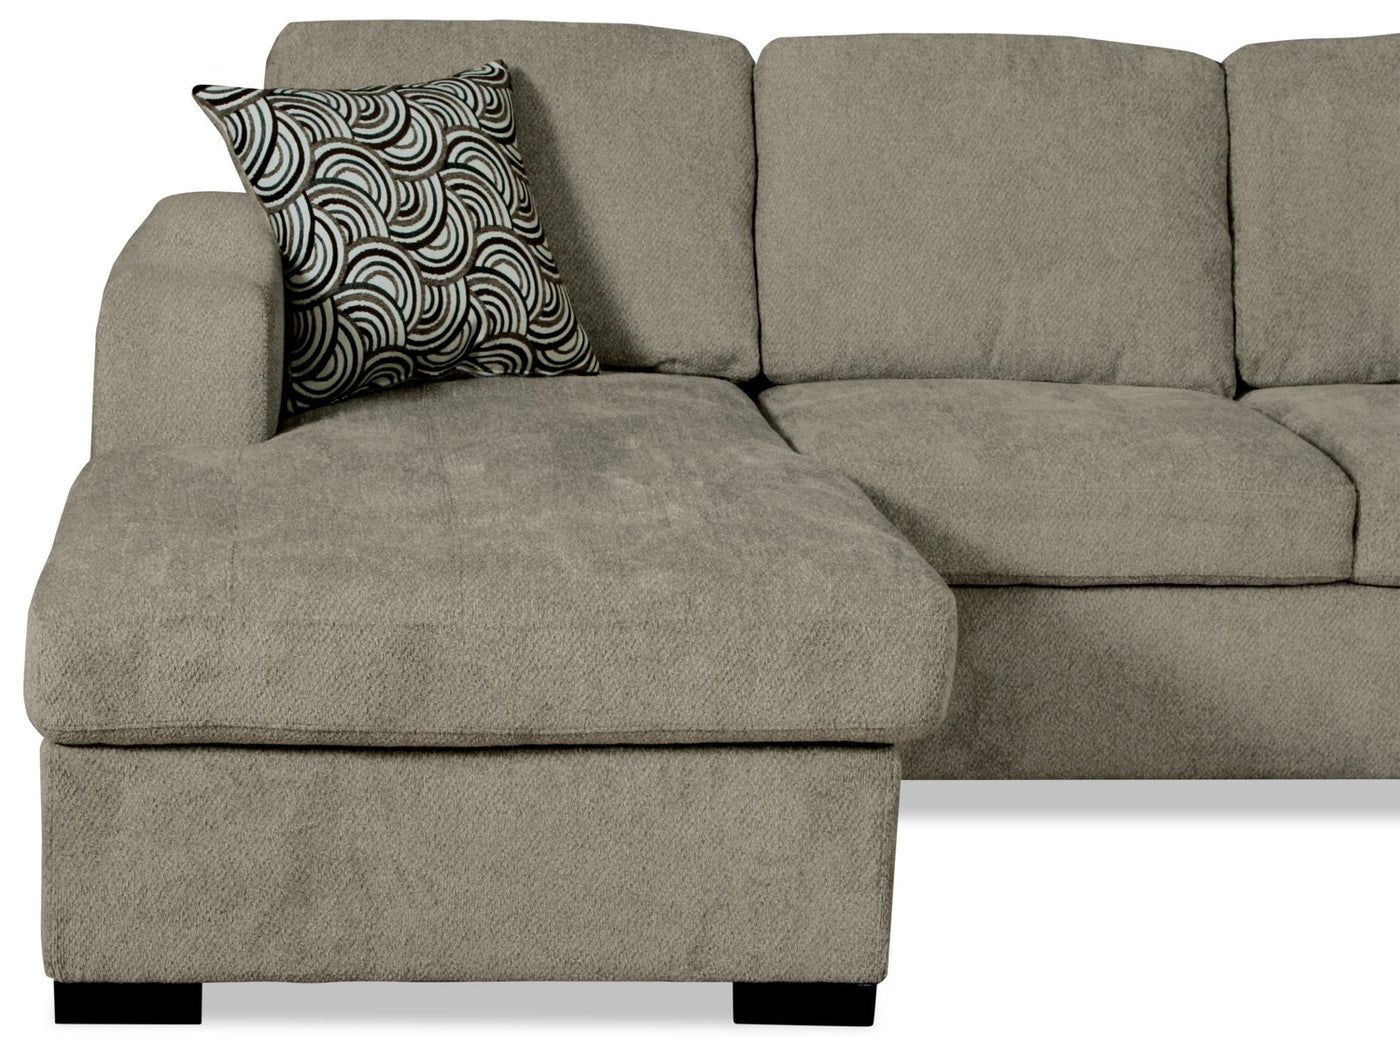 Most Current Izzy 4 Piece Chenille Sleeper Sectional With Right Facing Storage C With Regard To Chenille Sectional Sofas (View 4 of 15)